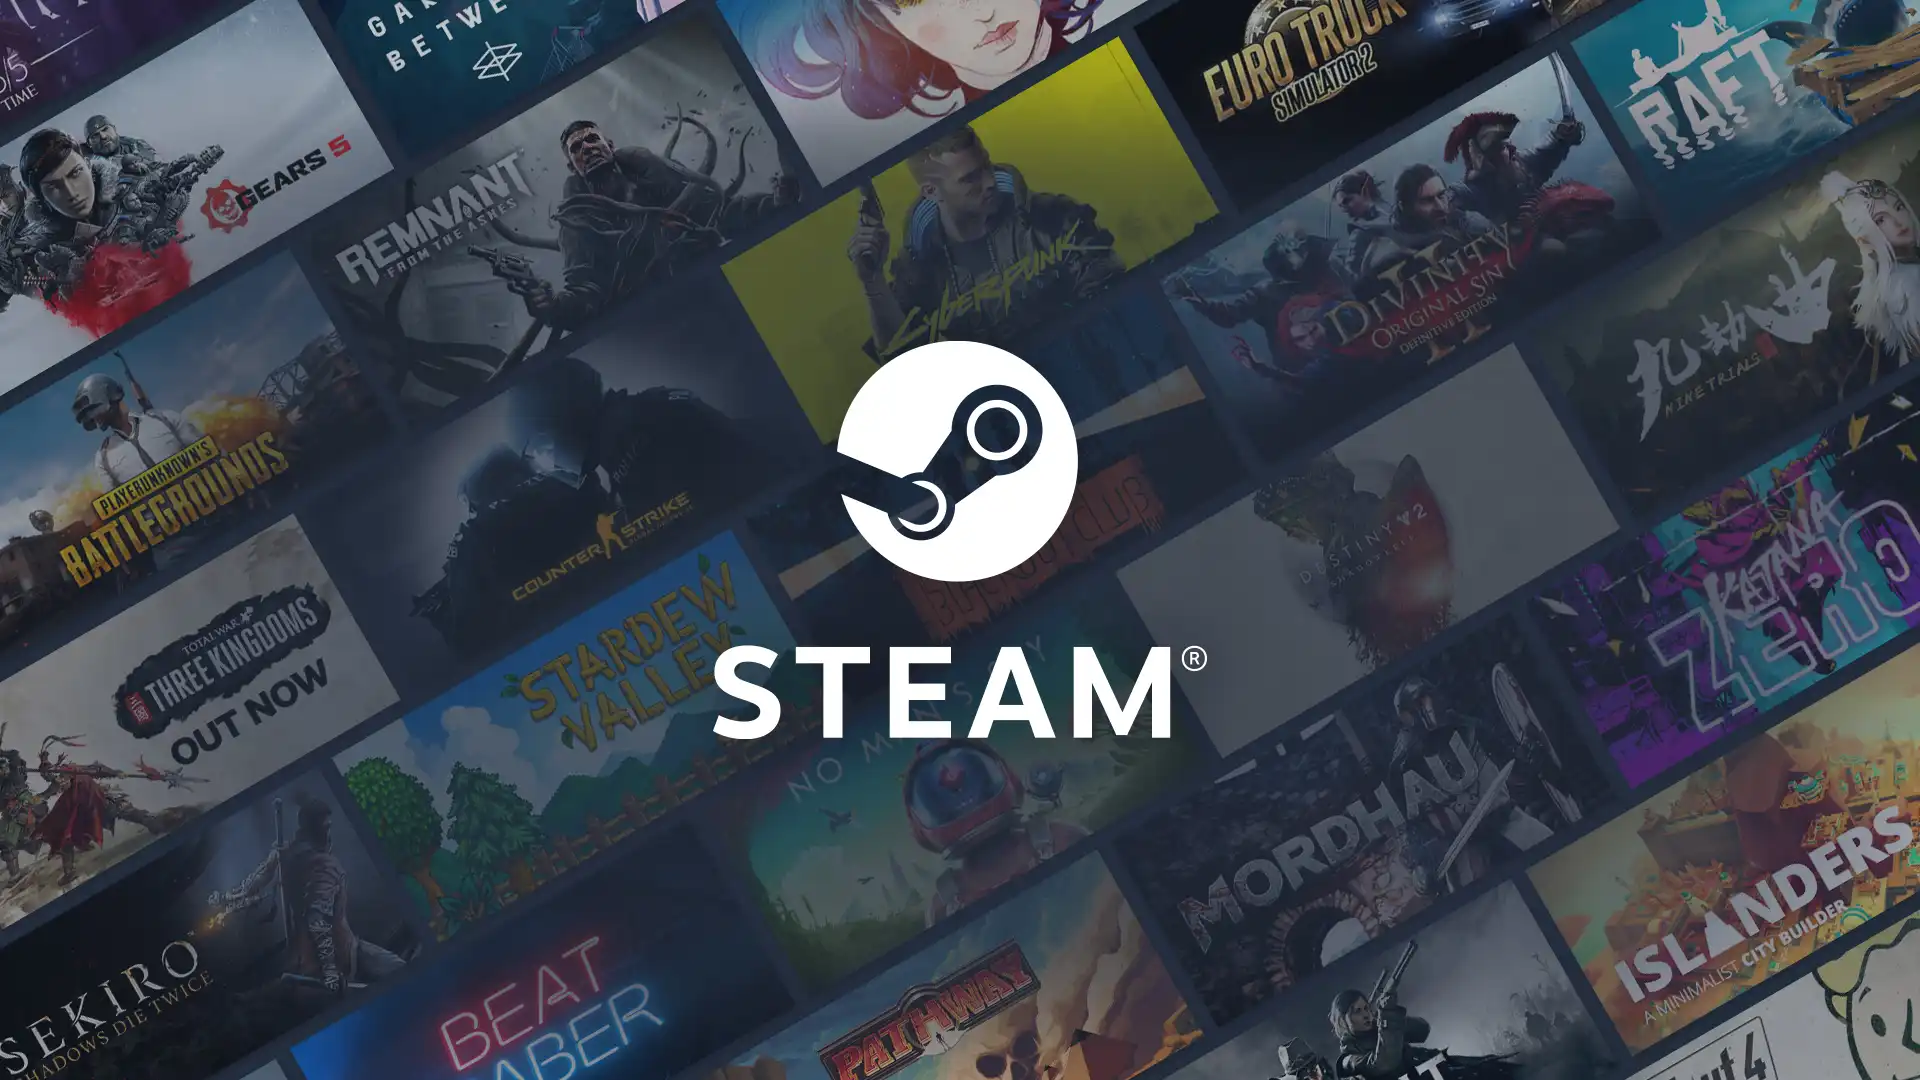 A Beginner’s Guide: How to Use a Steam Gift Card